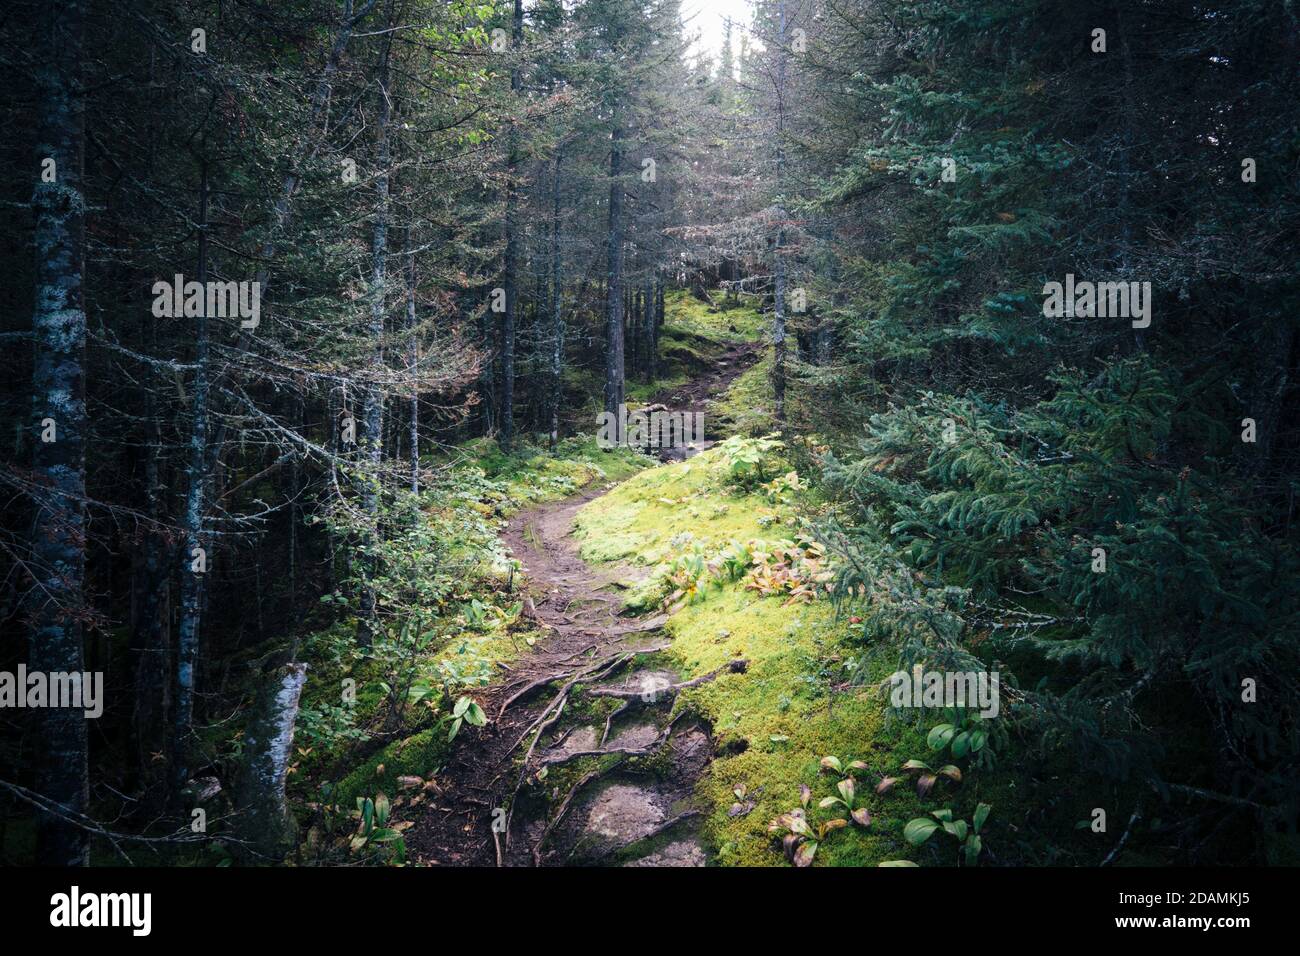 Rocky pathway surrounded by trees in a creepy and scary forest Stock Photo